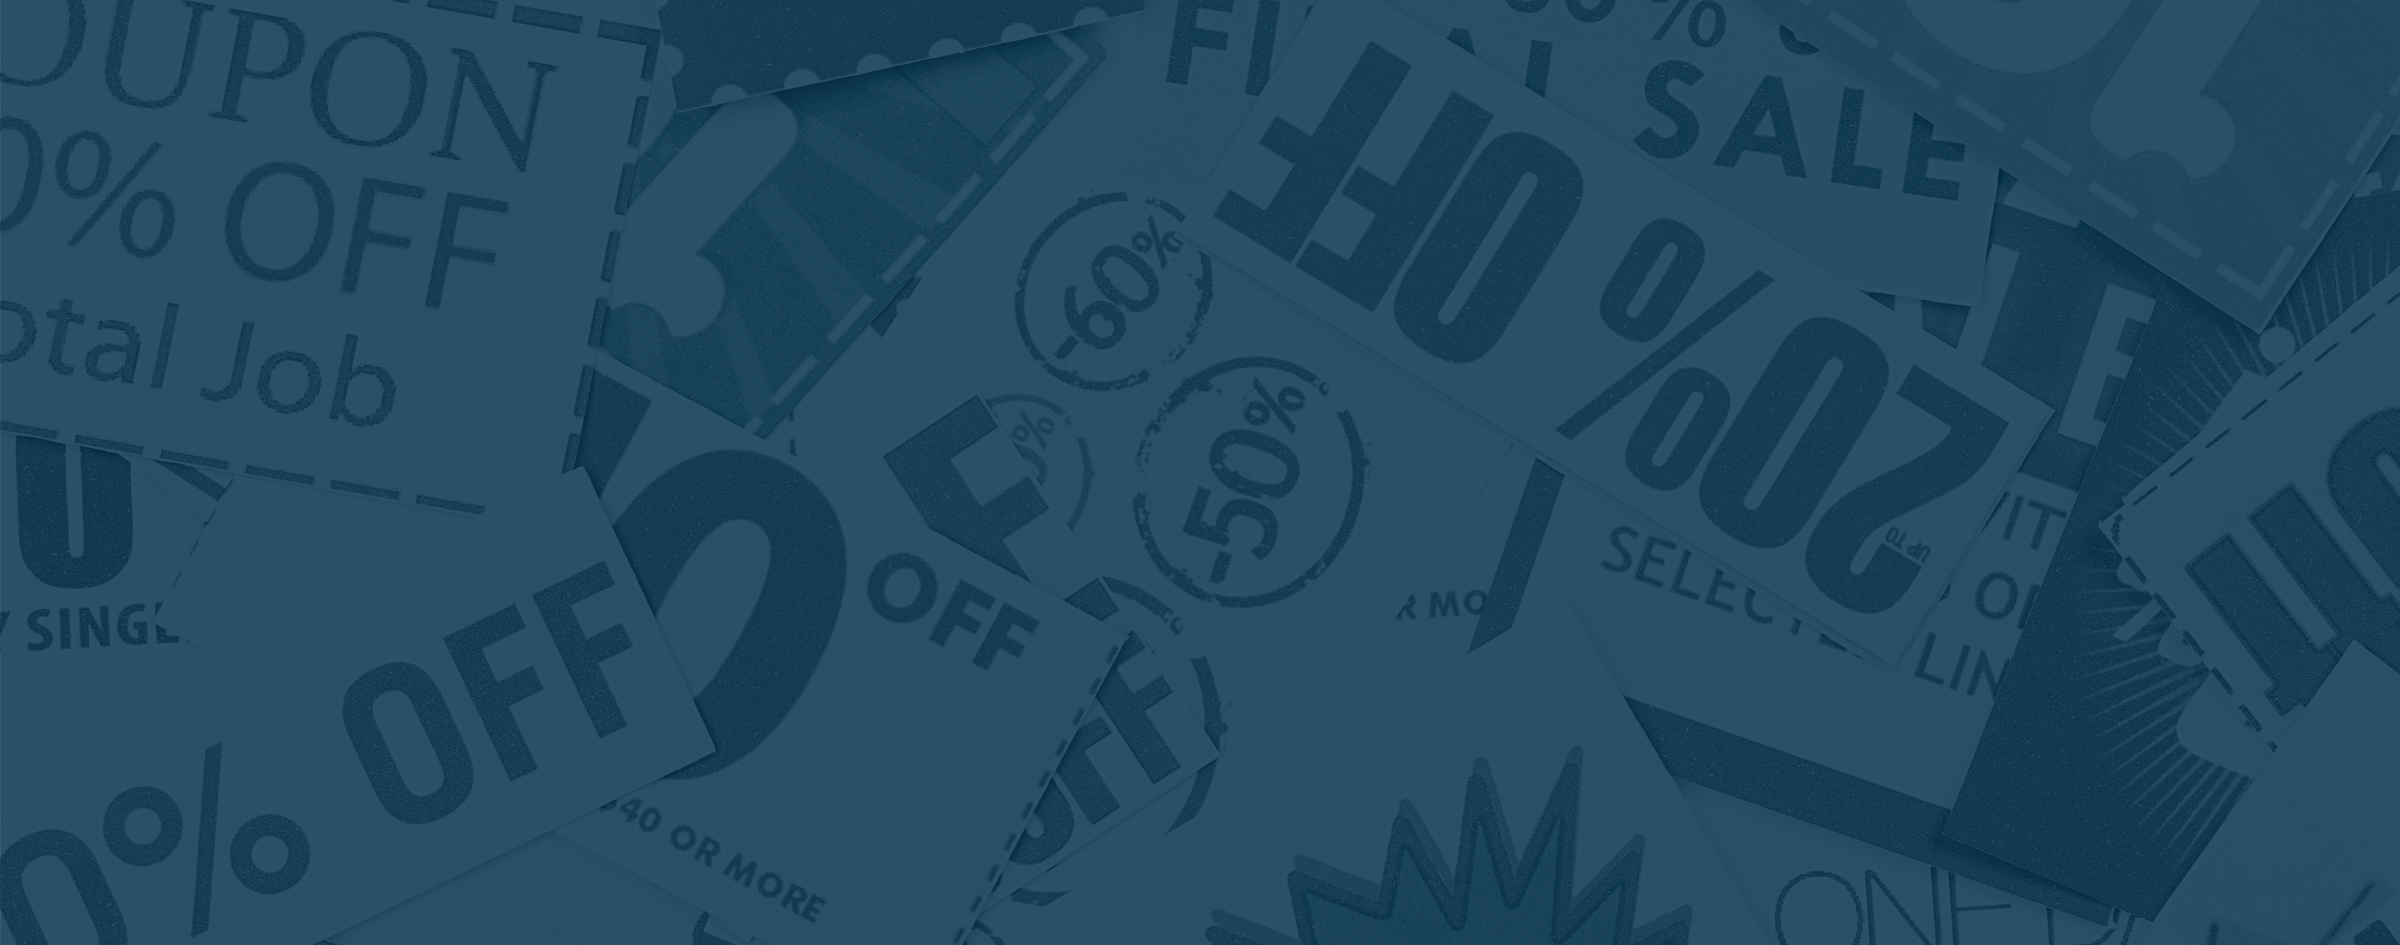 How to Implement Future-Use Coupons to Build Brand Loyalty